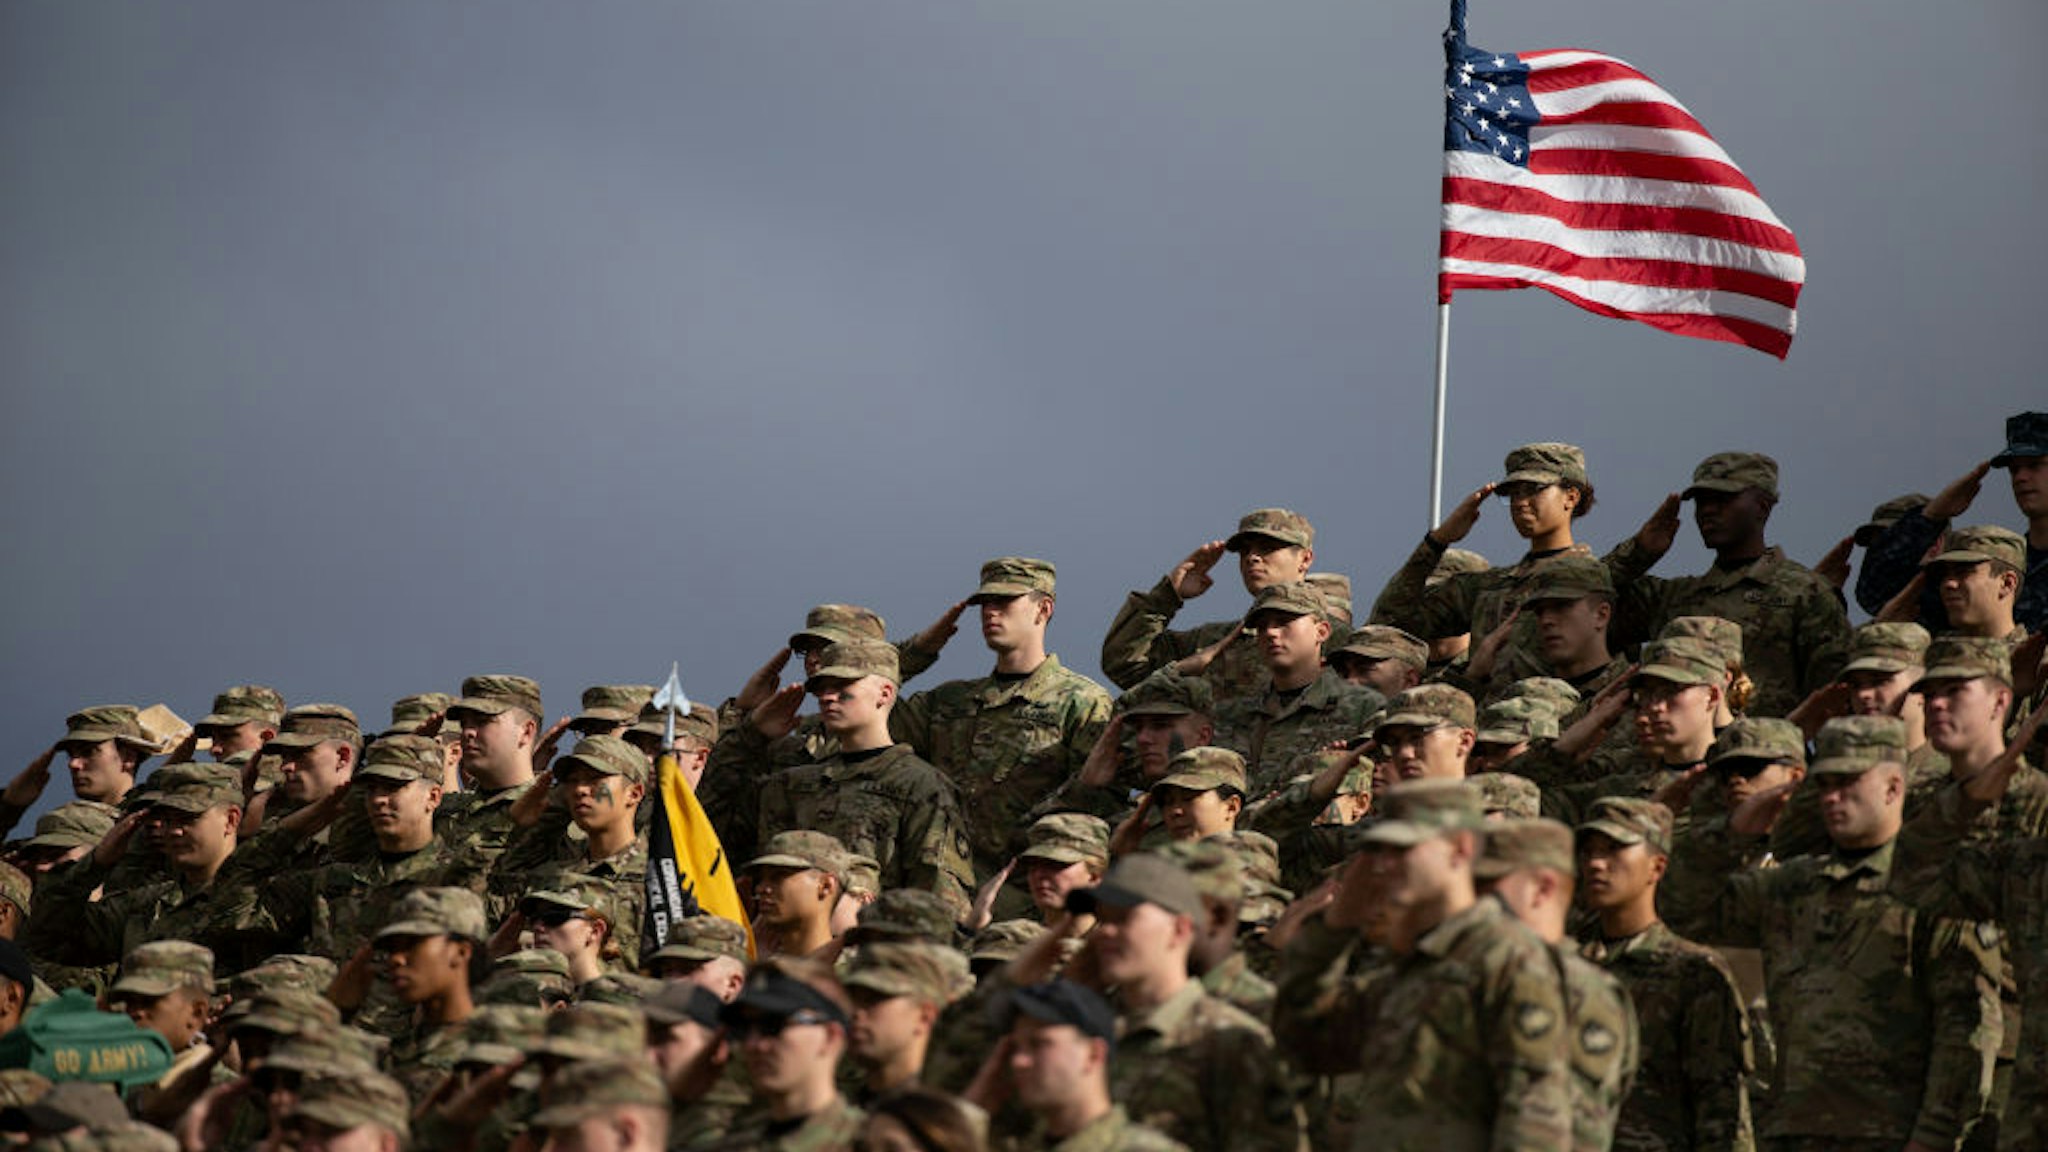 United States Military Academy cadets salute during the national anthem before the start of a game between the Army Black Knights and the Air Force Falcons at Michie Stadium on November 3, 2018 in West Point, New York.